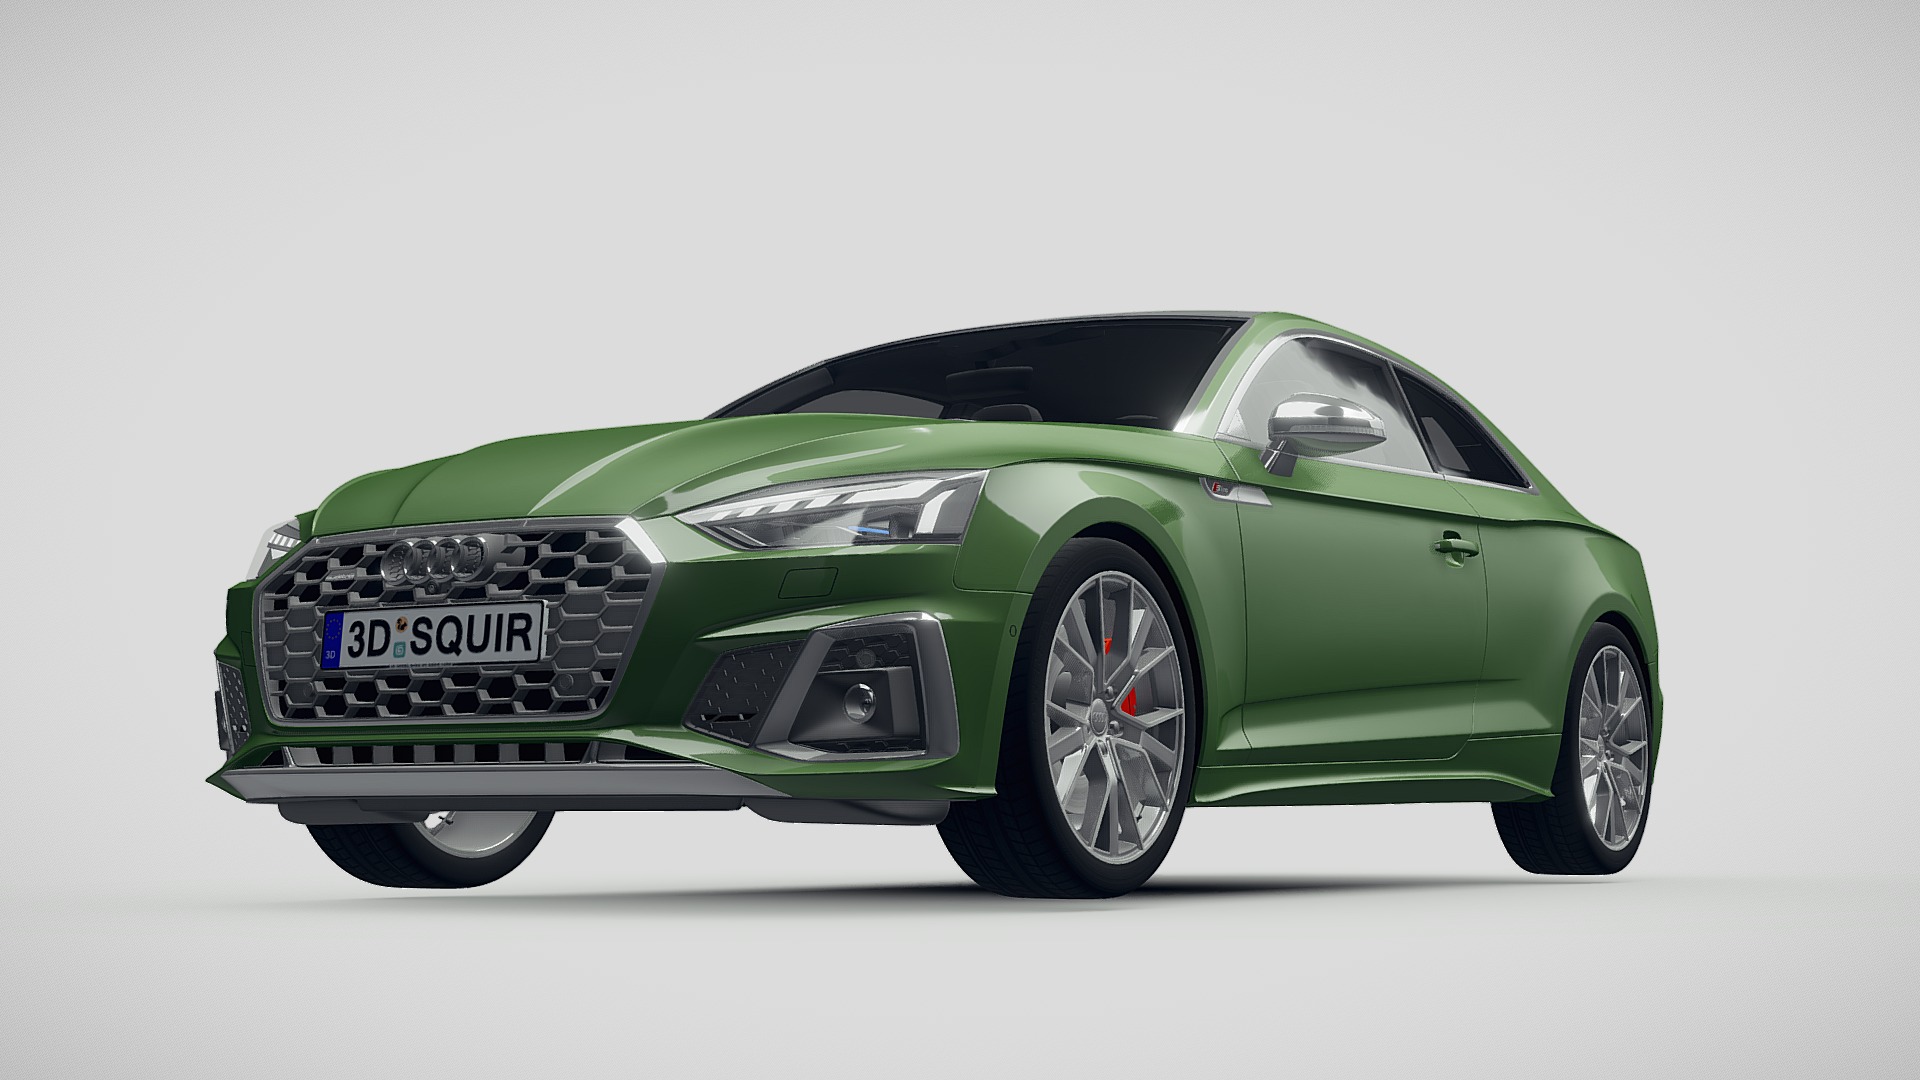 3D model Audi A5 Coupe S- Line 2020 - This is a 3D model of the Audi A5 Coupe S- Line 2020. The 3D model is about a green car with a white background.